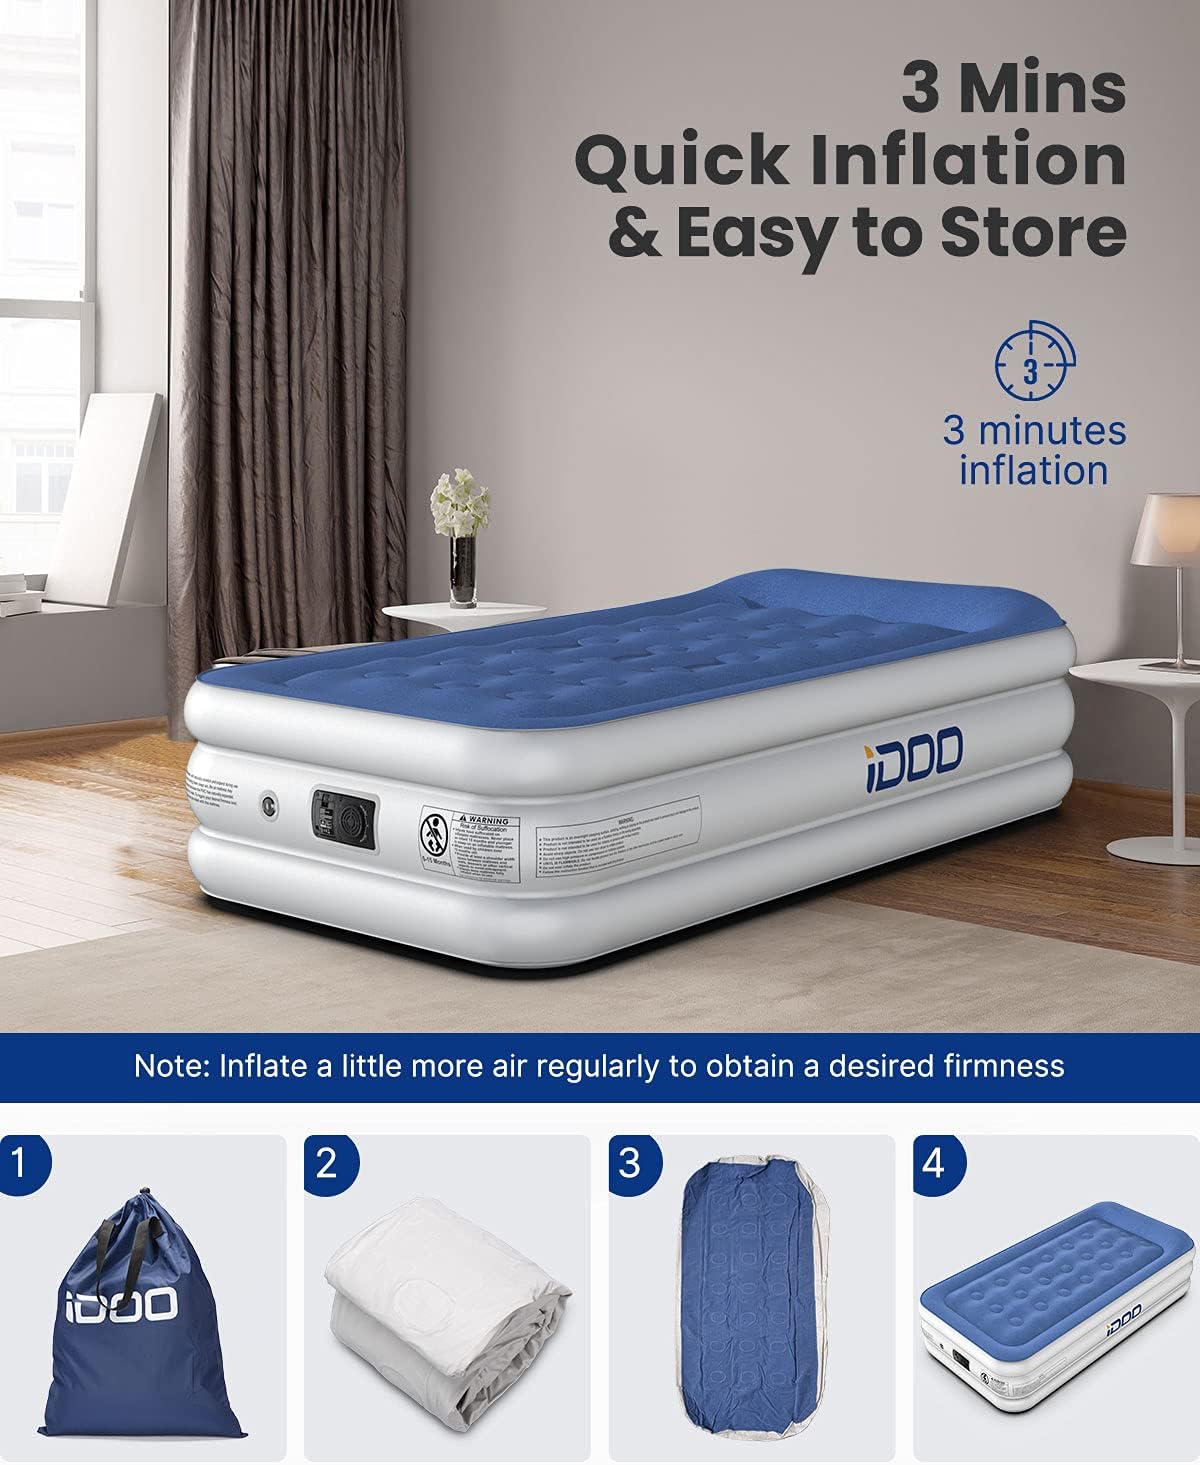 Twin Size 18" Inflatable Bed with Integrated Pillow - _wf_cus Air Bed Best Seller_AU Best Seller_CA Twin by idoo